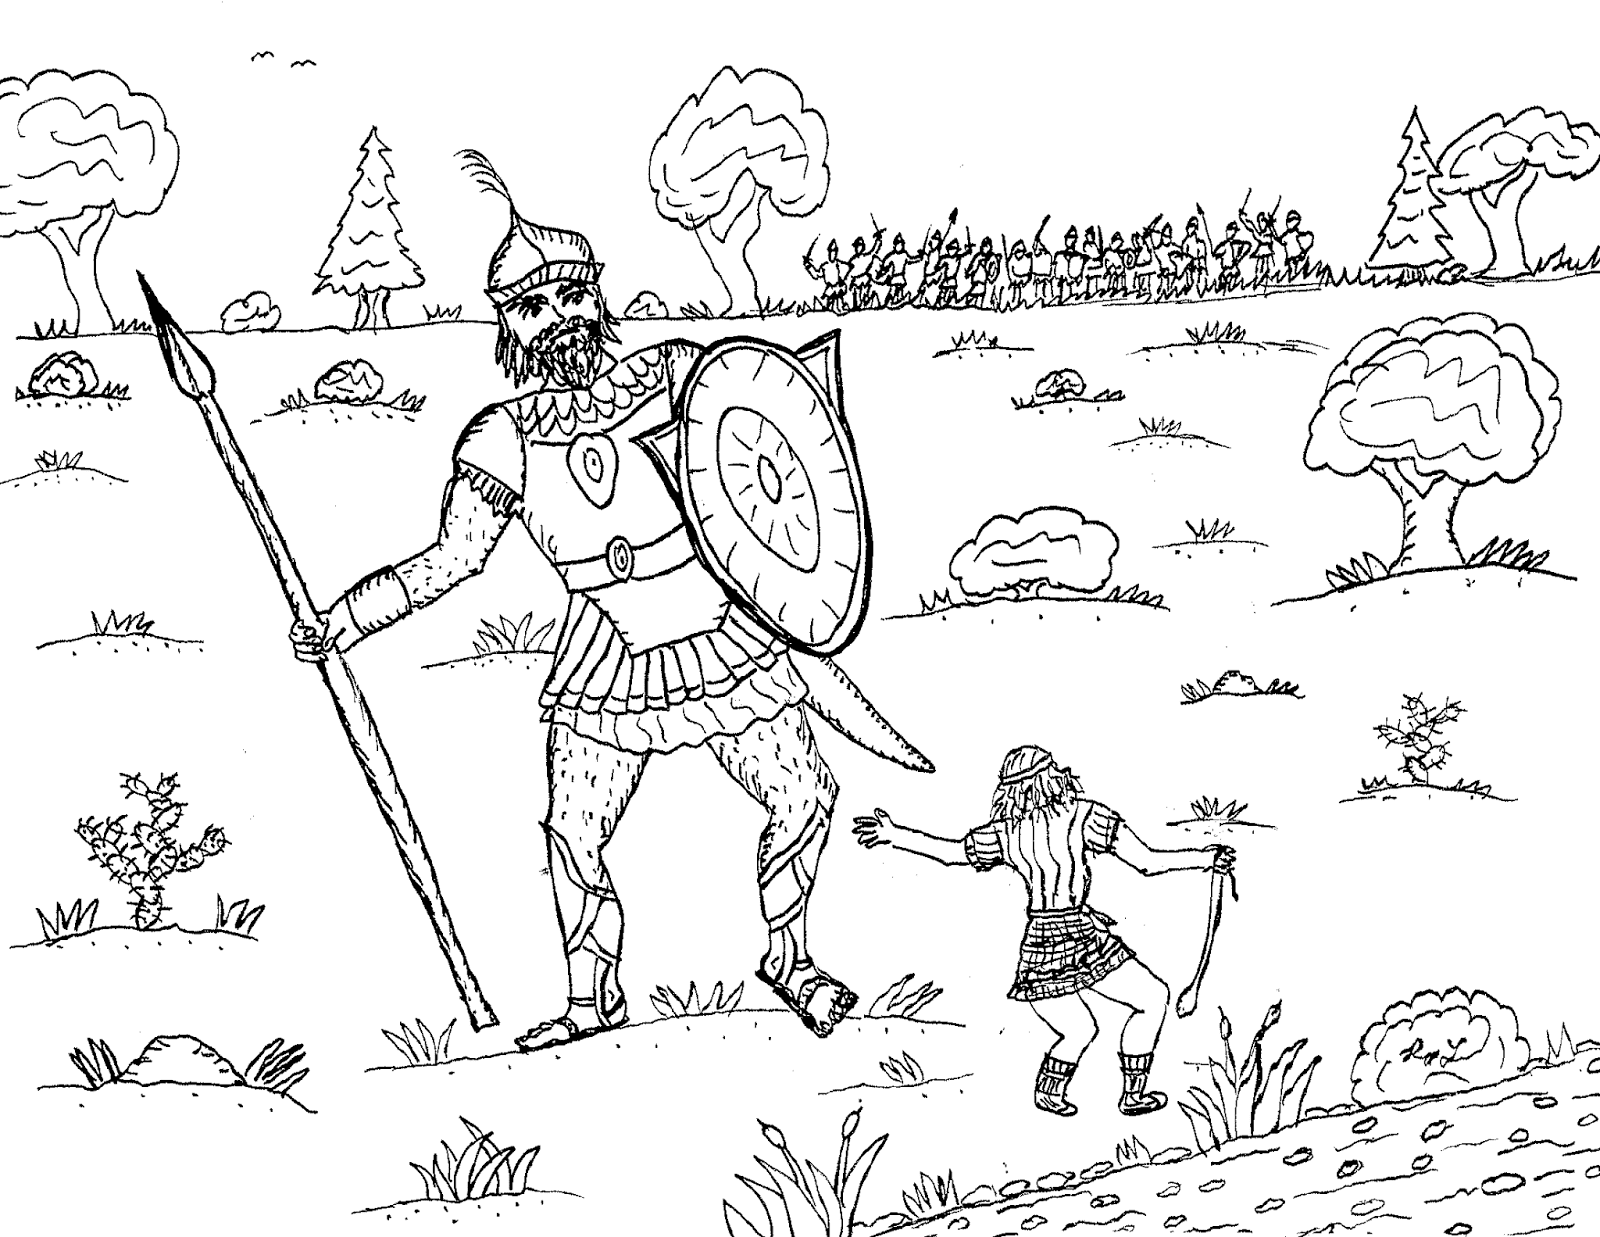 Robin's Great Coloring Pages: David and Goliath Before the Battle and ...